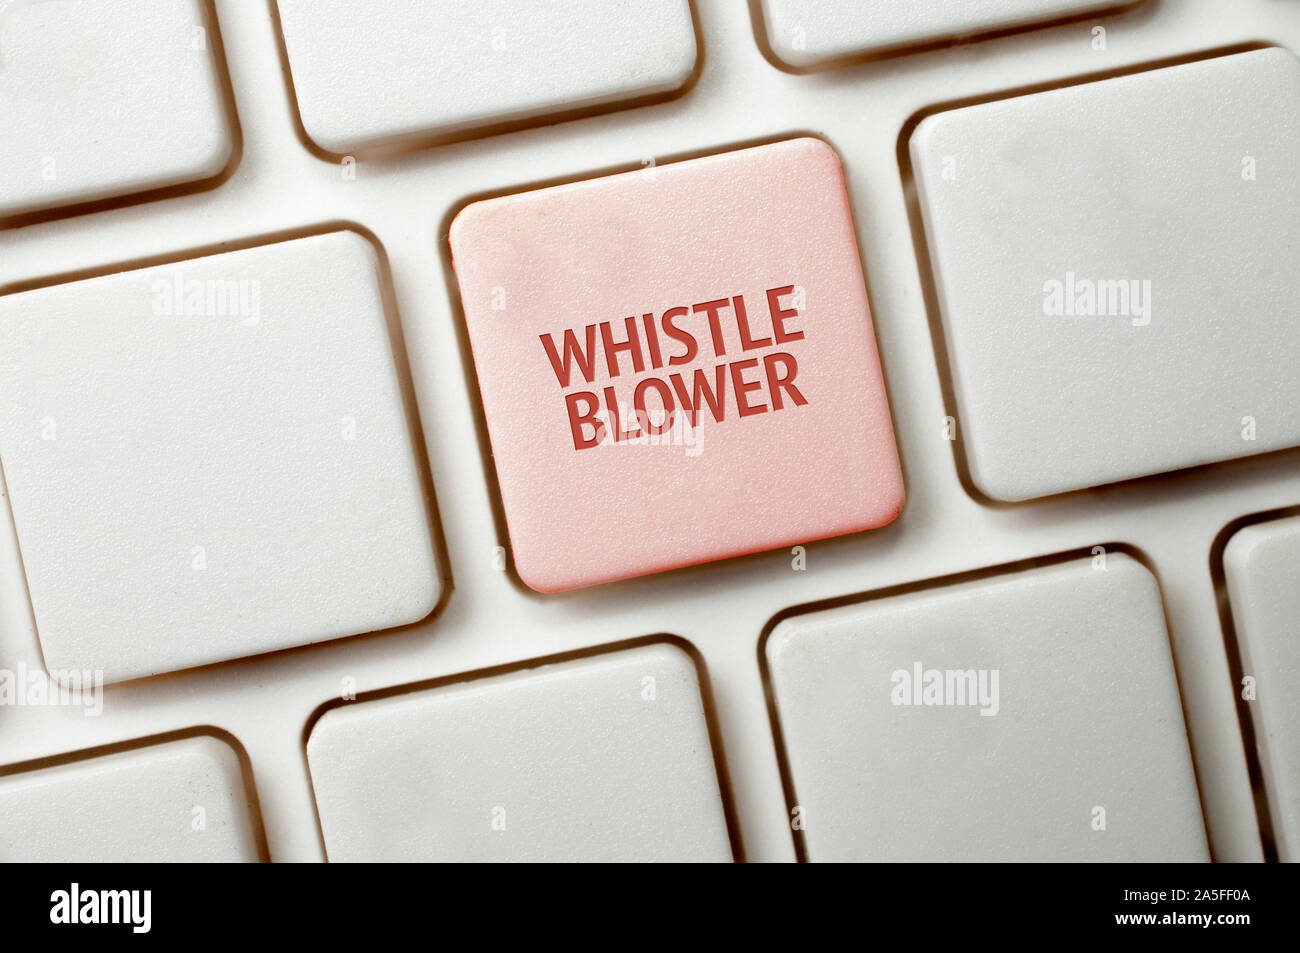 Whistleblowing concept: White keyboard with a red key and the whistleblower word Stock Photo